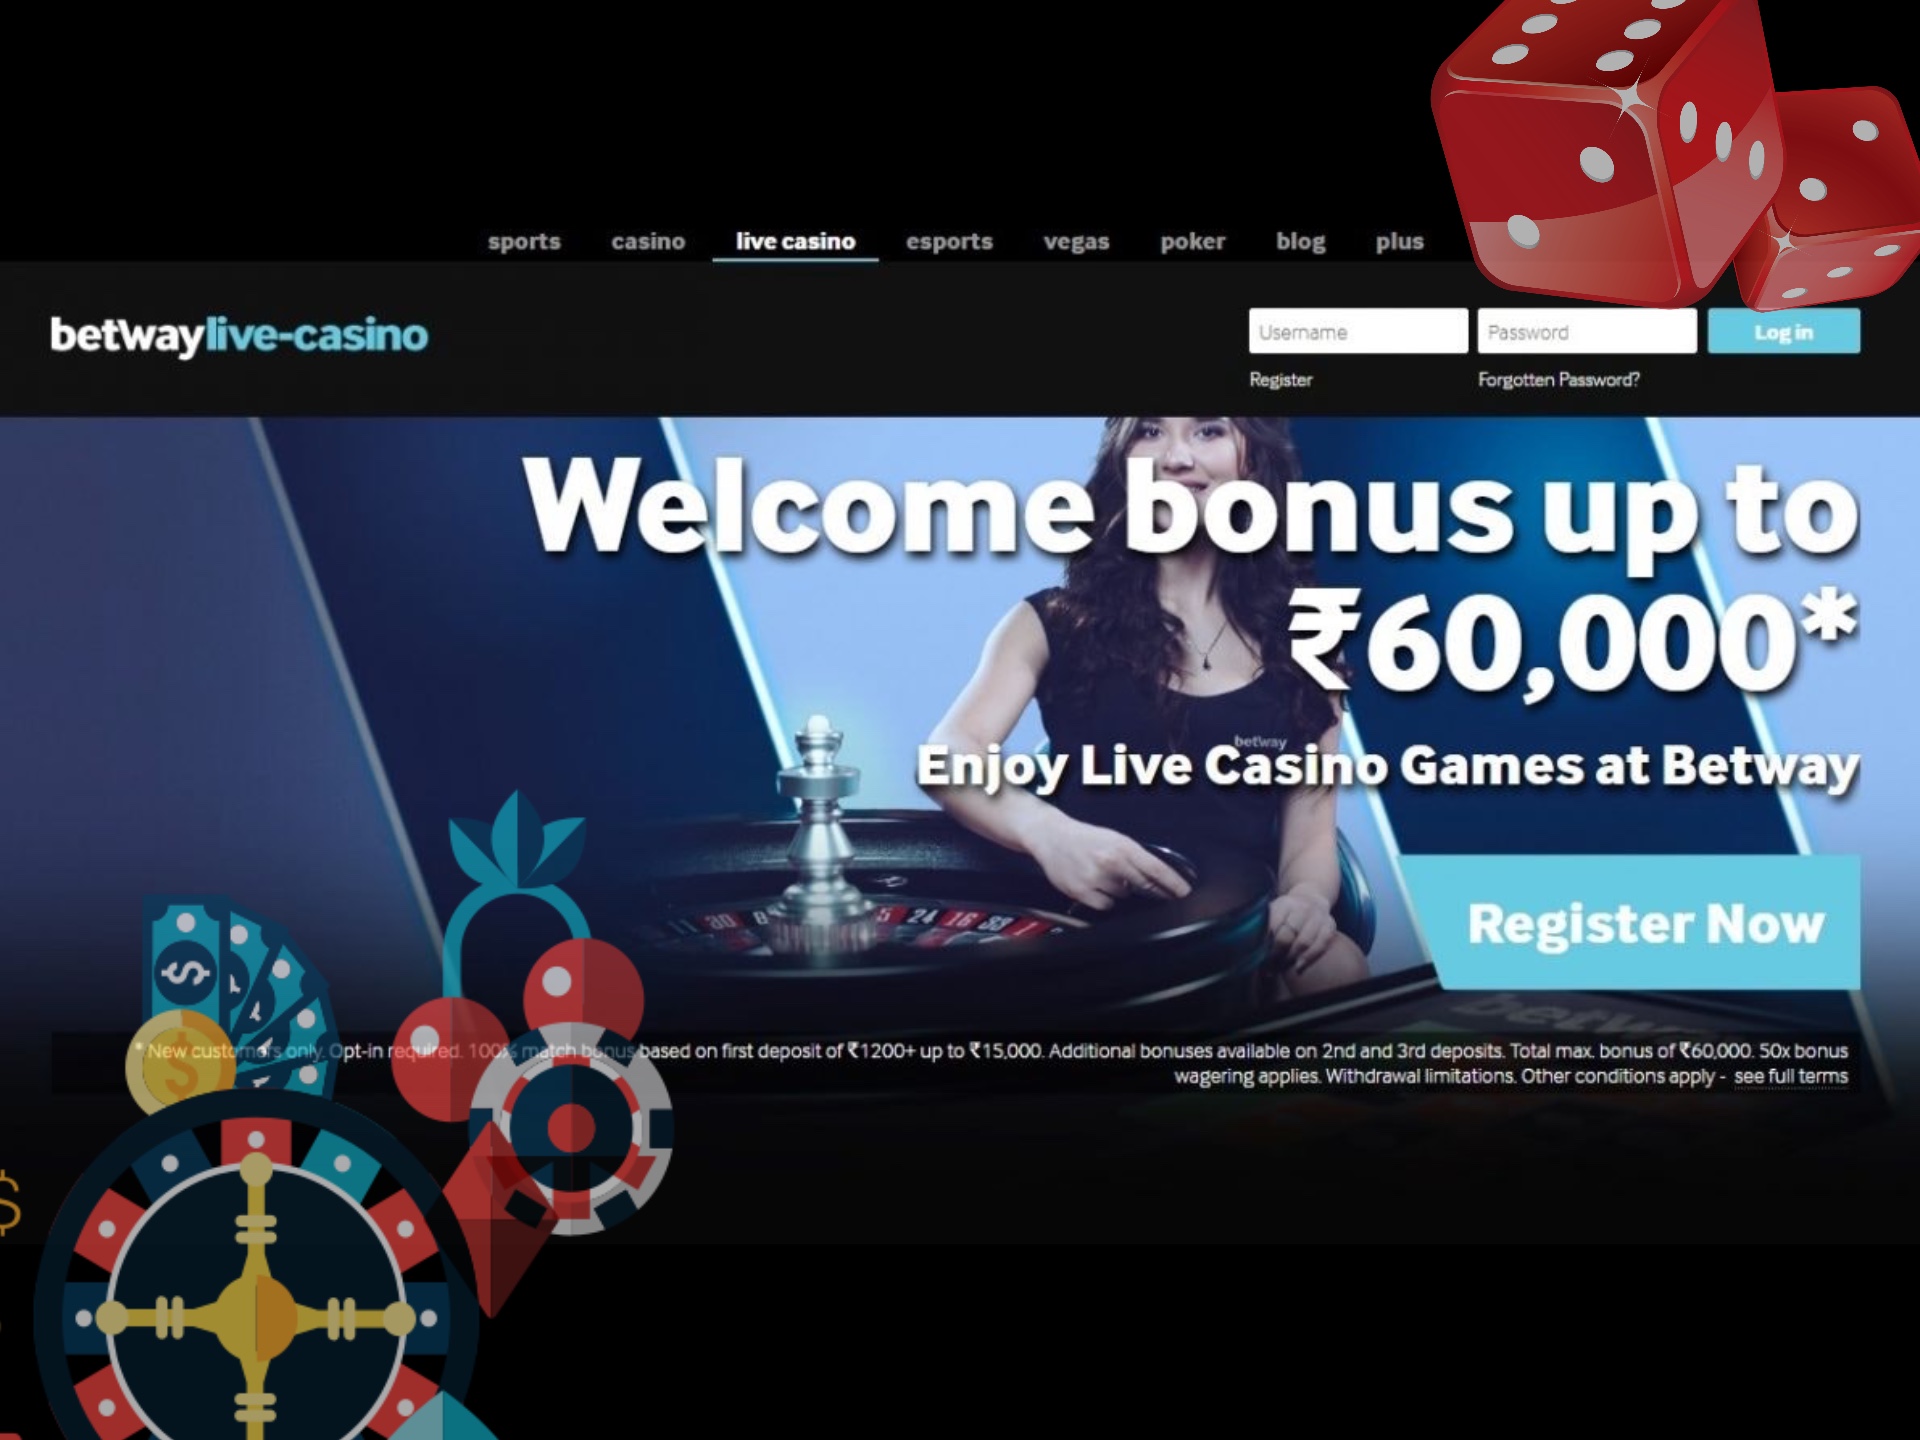 All the online casinos in India have their own Welcome bonuses.